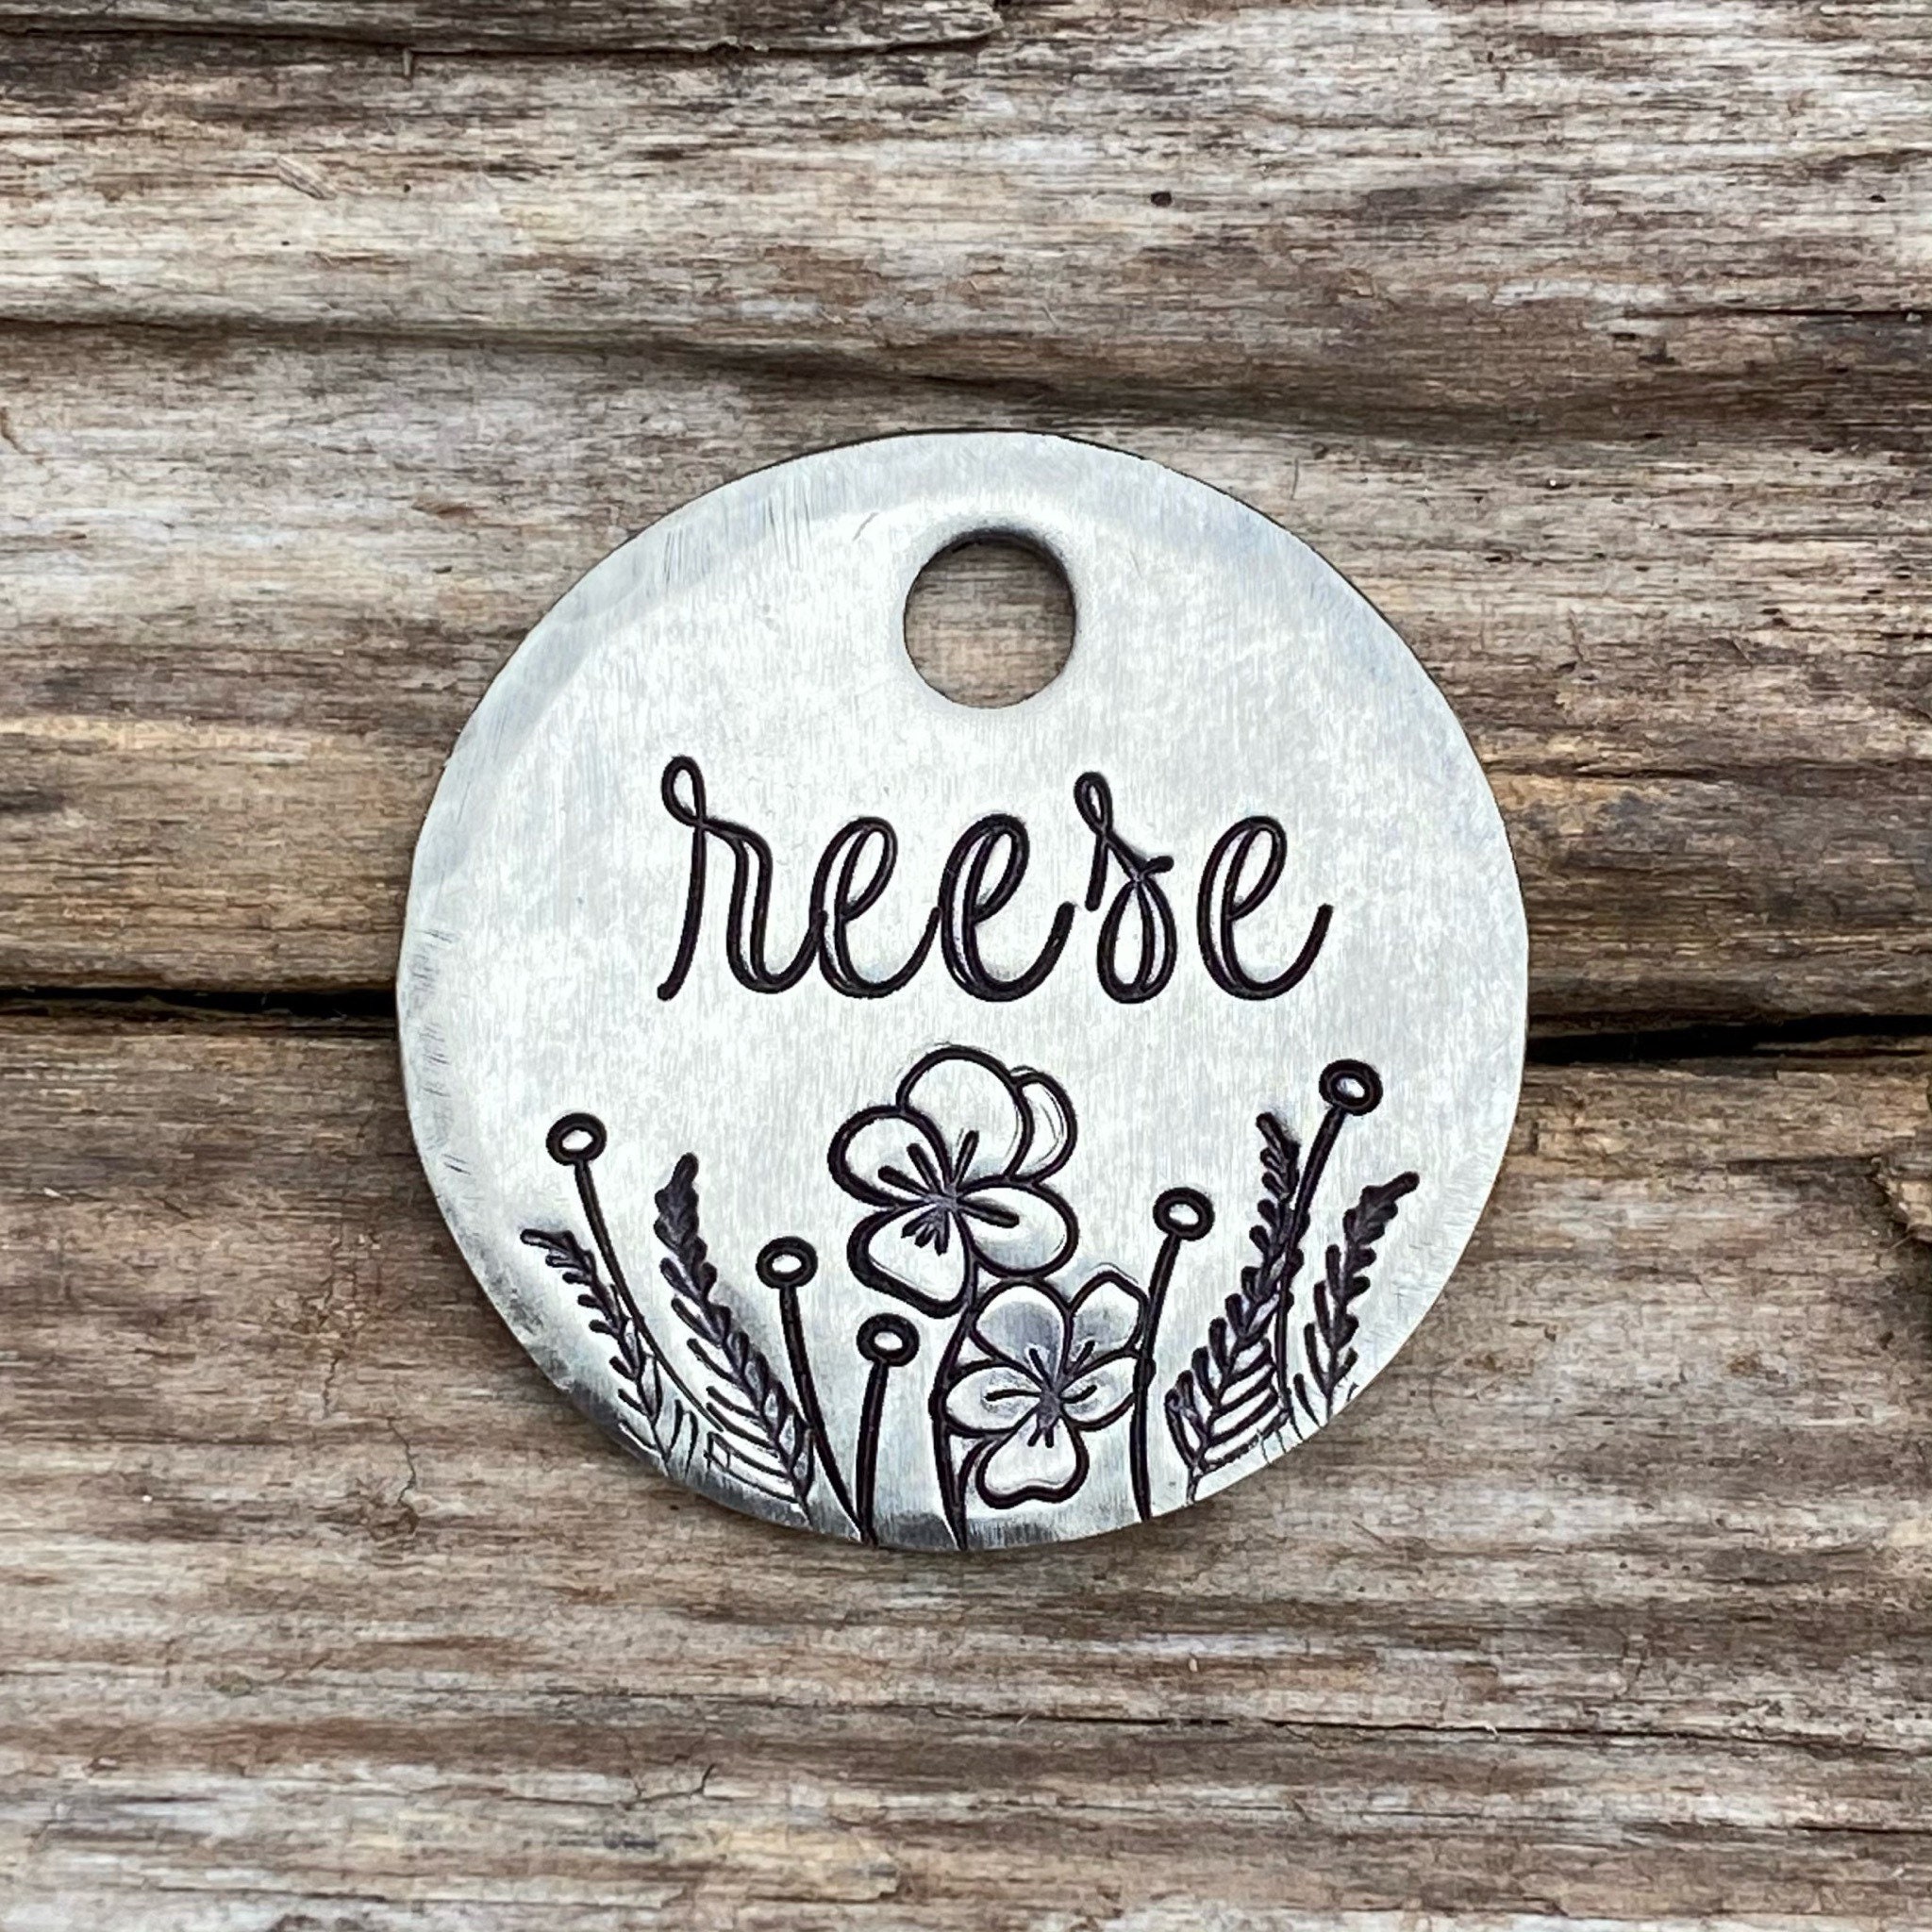 ONLY Available With Purchase of a Pet Tag, Split Ring, Key Ring